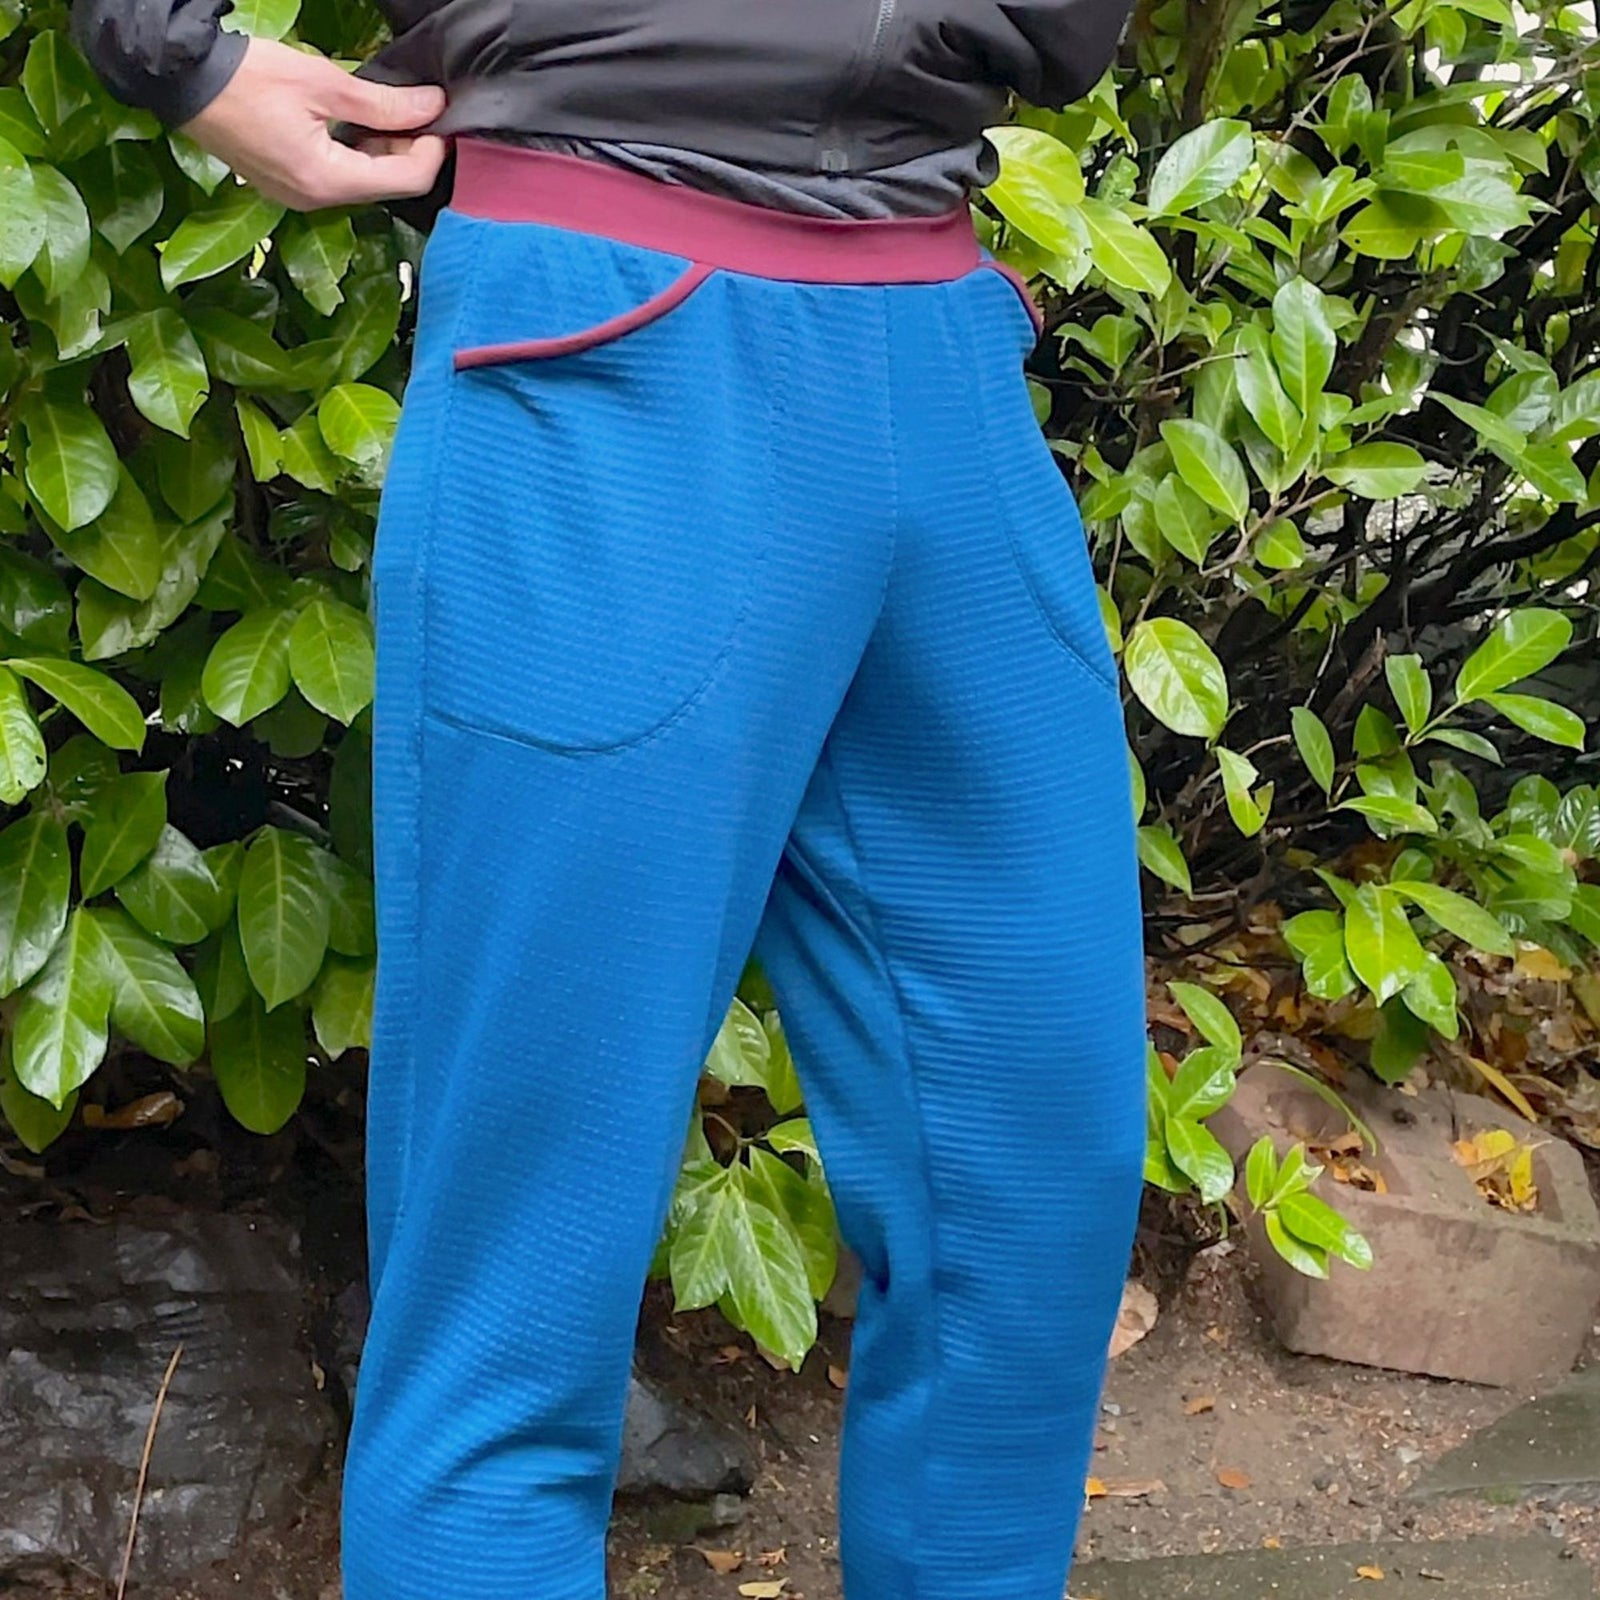 Free sewing patterns for harem trousers/sweatpants. Quick sewing  project | Pants sewing pattern, Harem pants pattern, Pattern drawstring